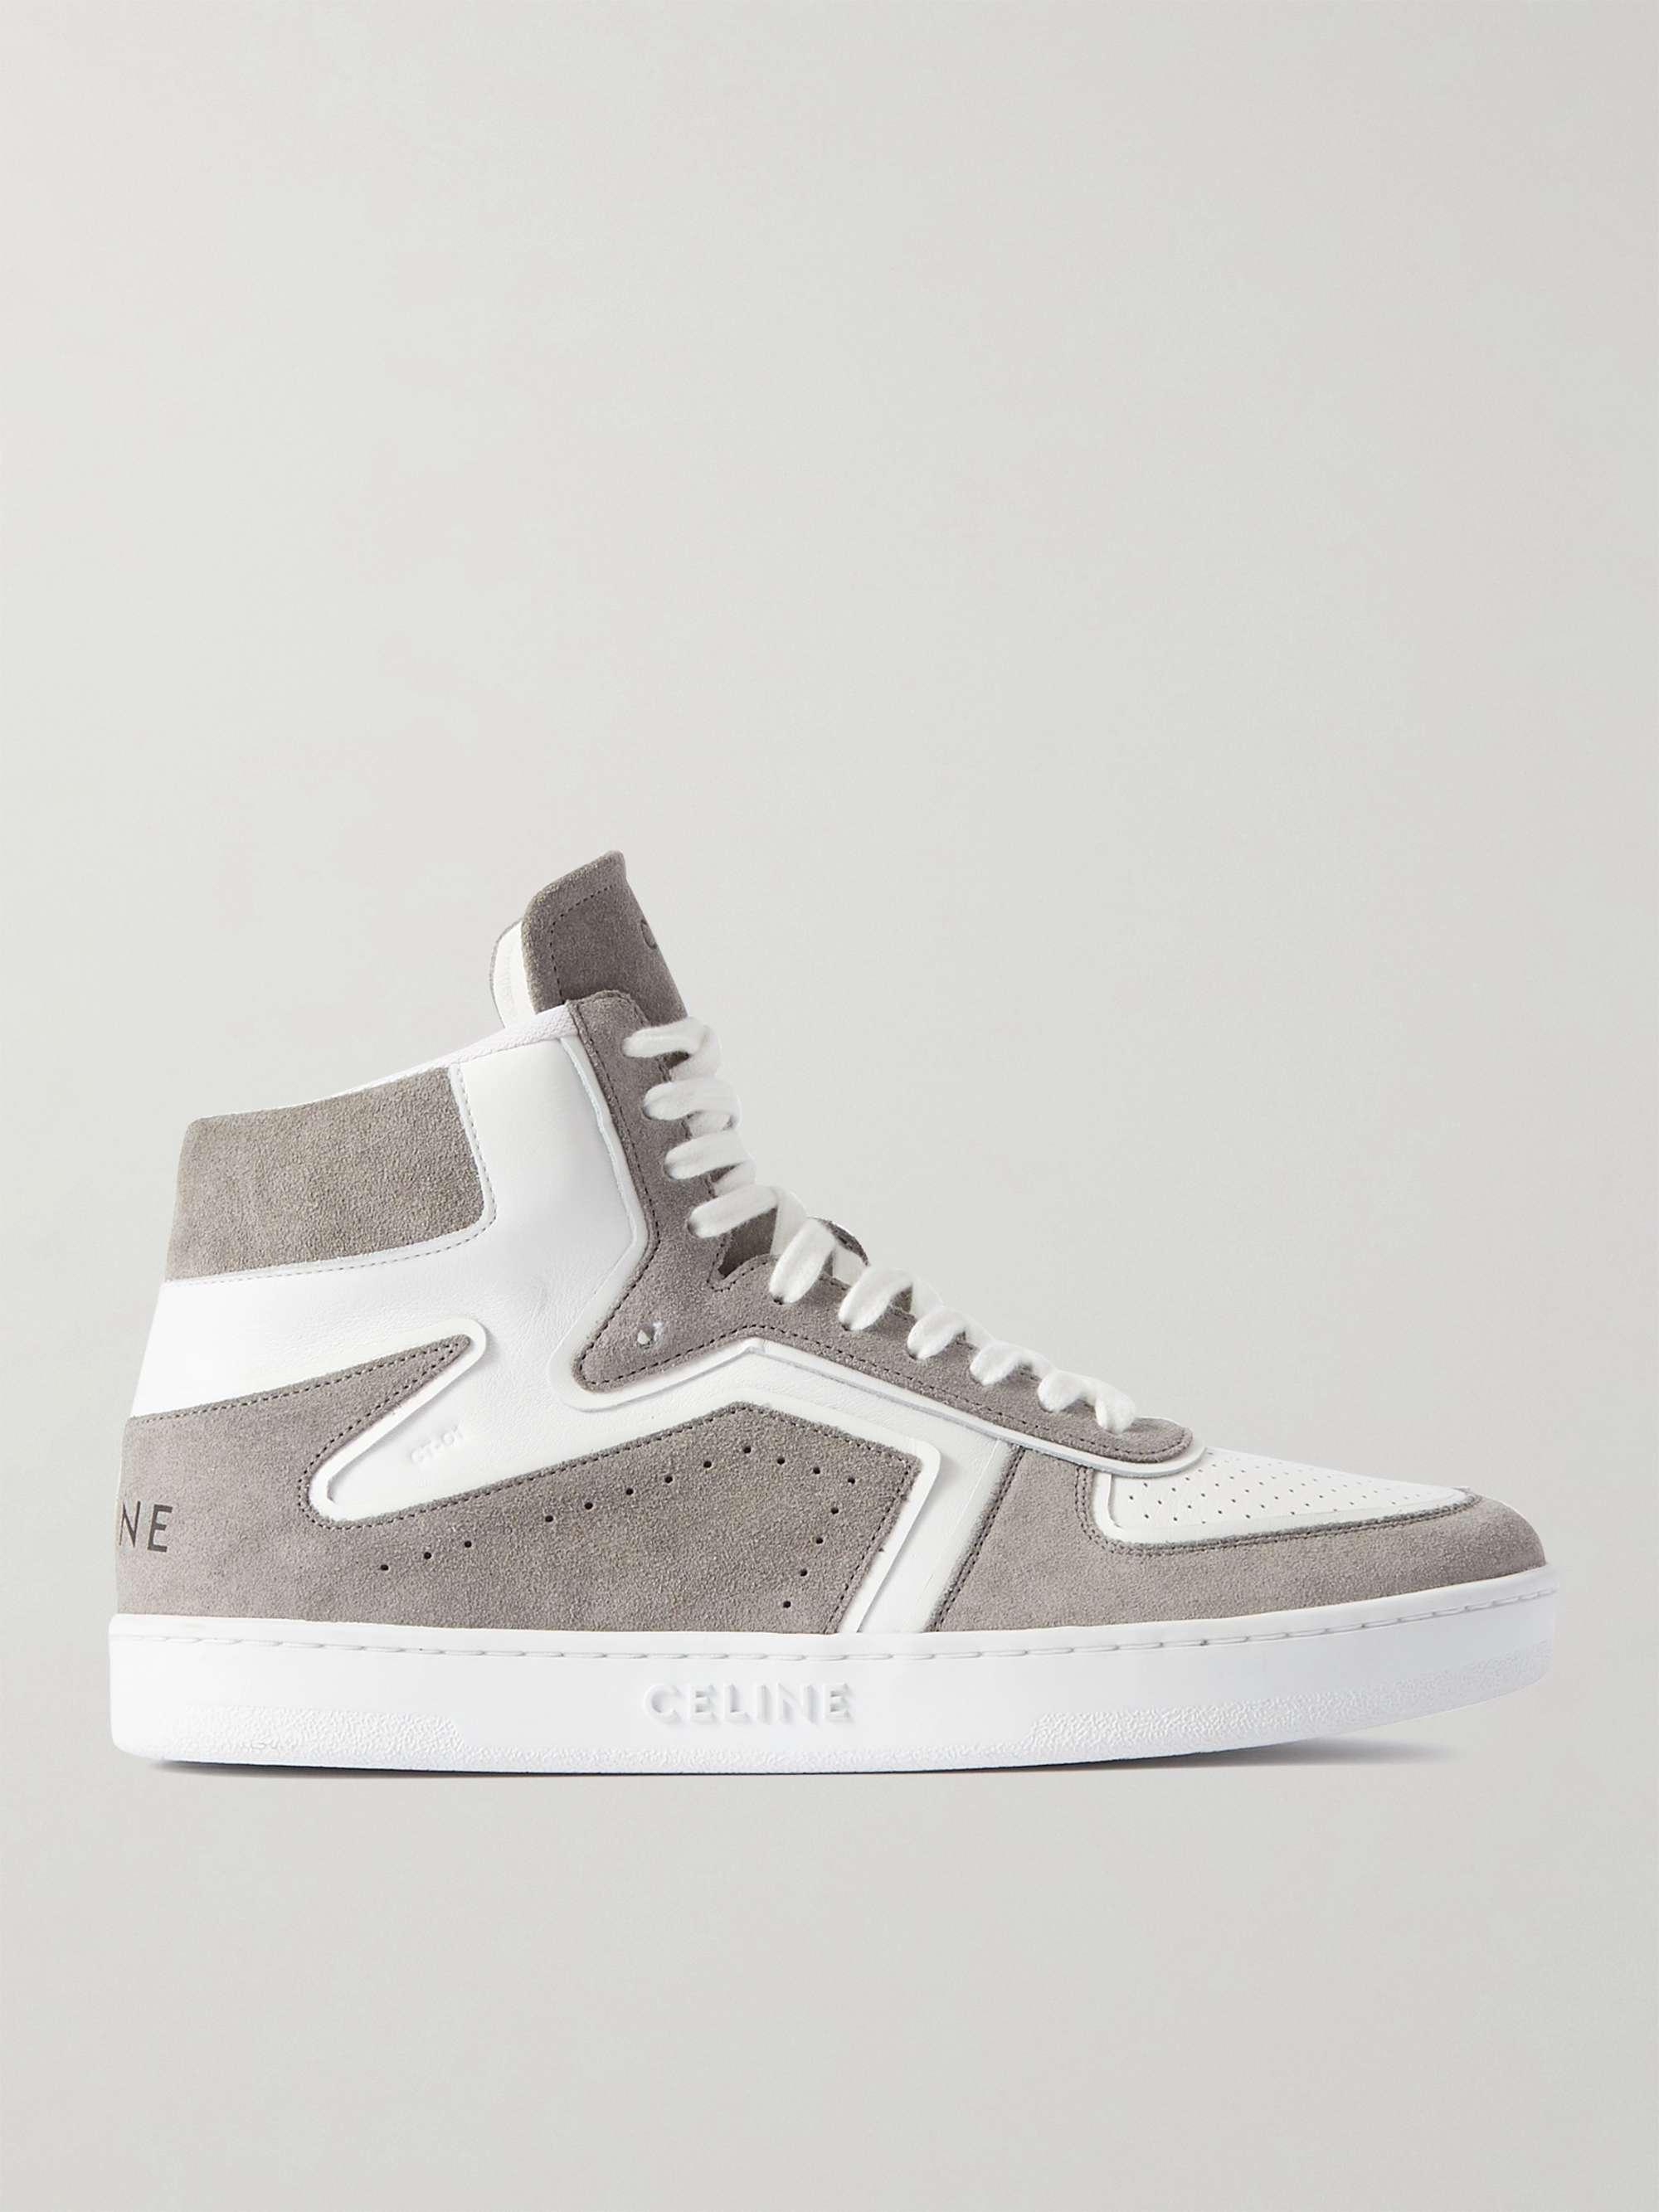 CELINE HOMME Z Suede and Leather High-Top Sneakers for Men | MR PORTER